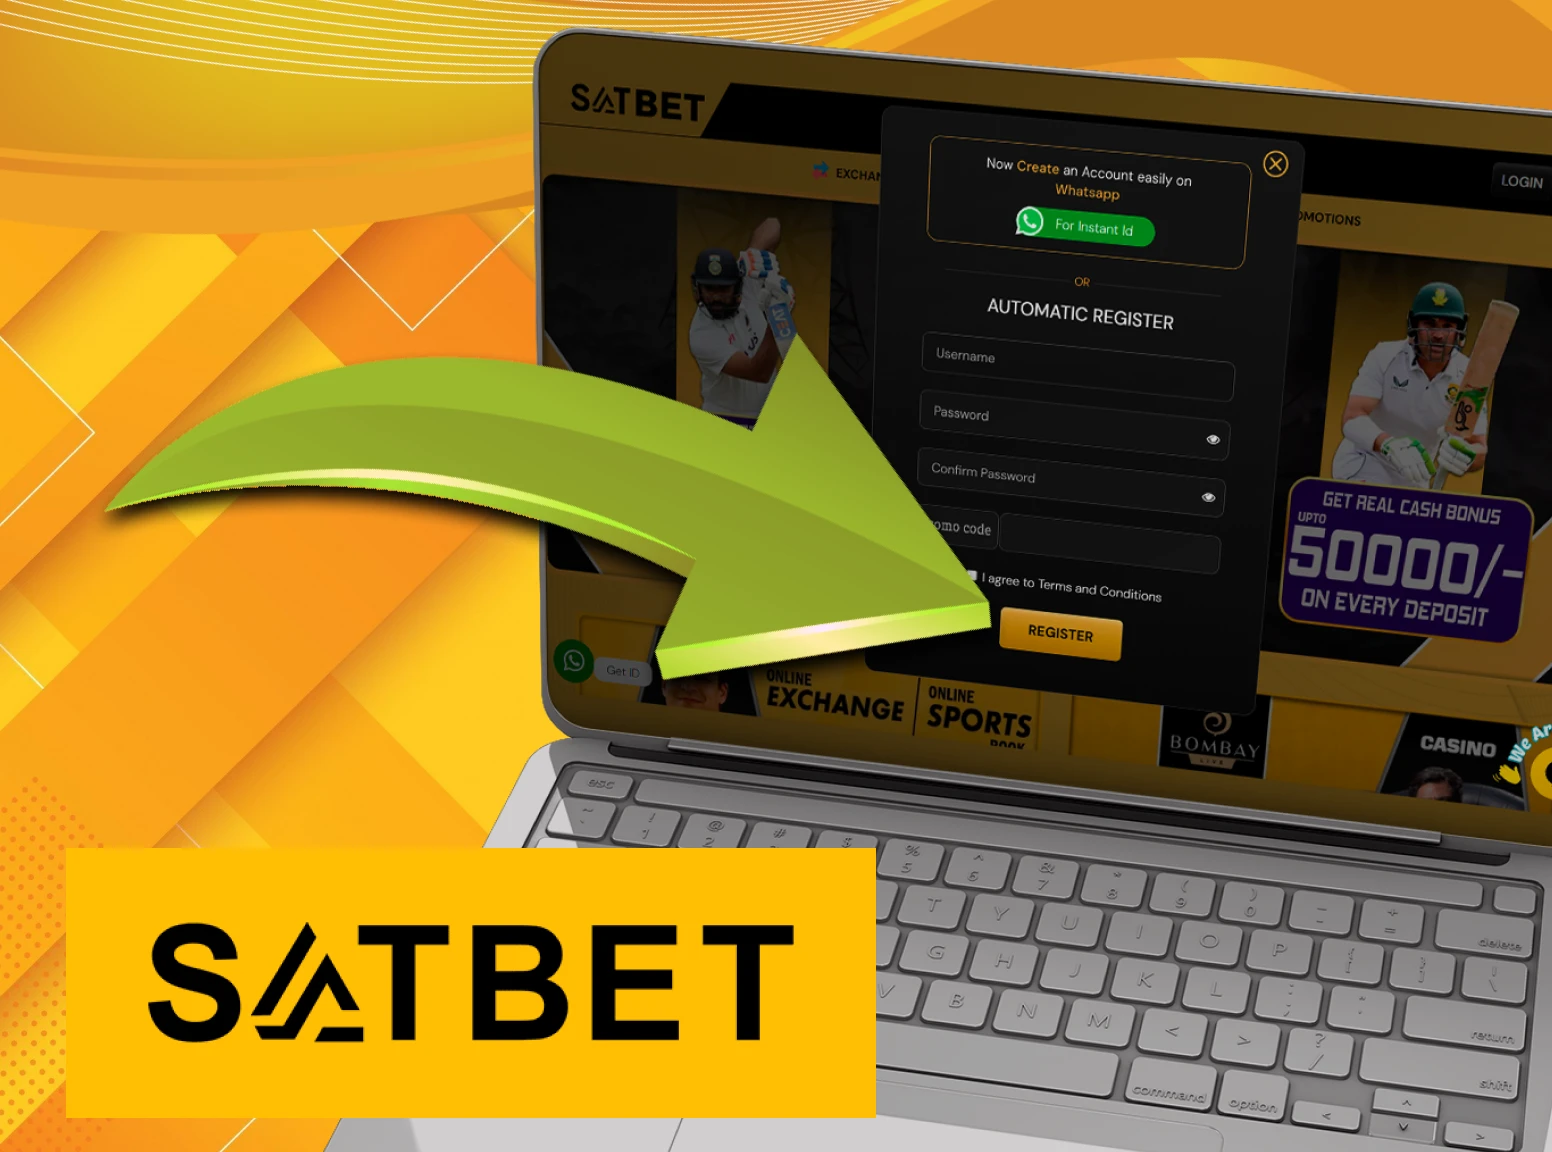 To receive the bonus from the promotional code, complete the registration process on Satbet.